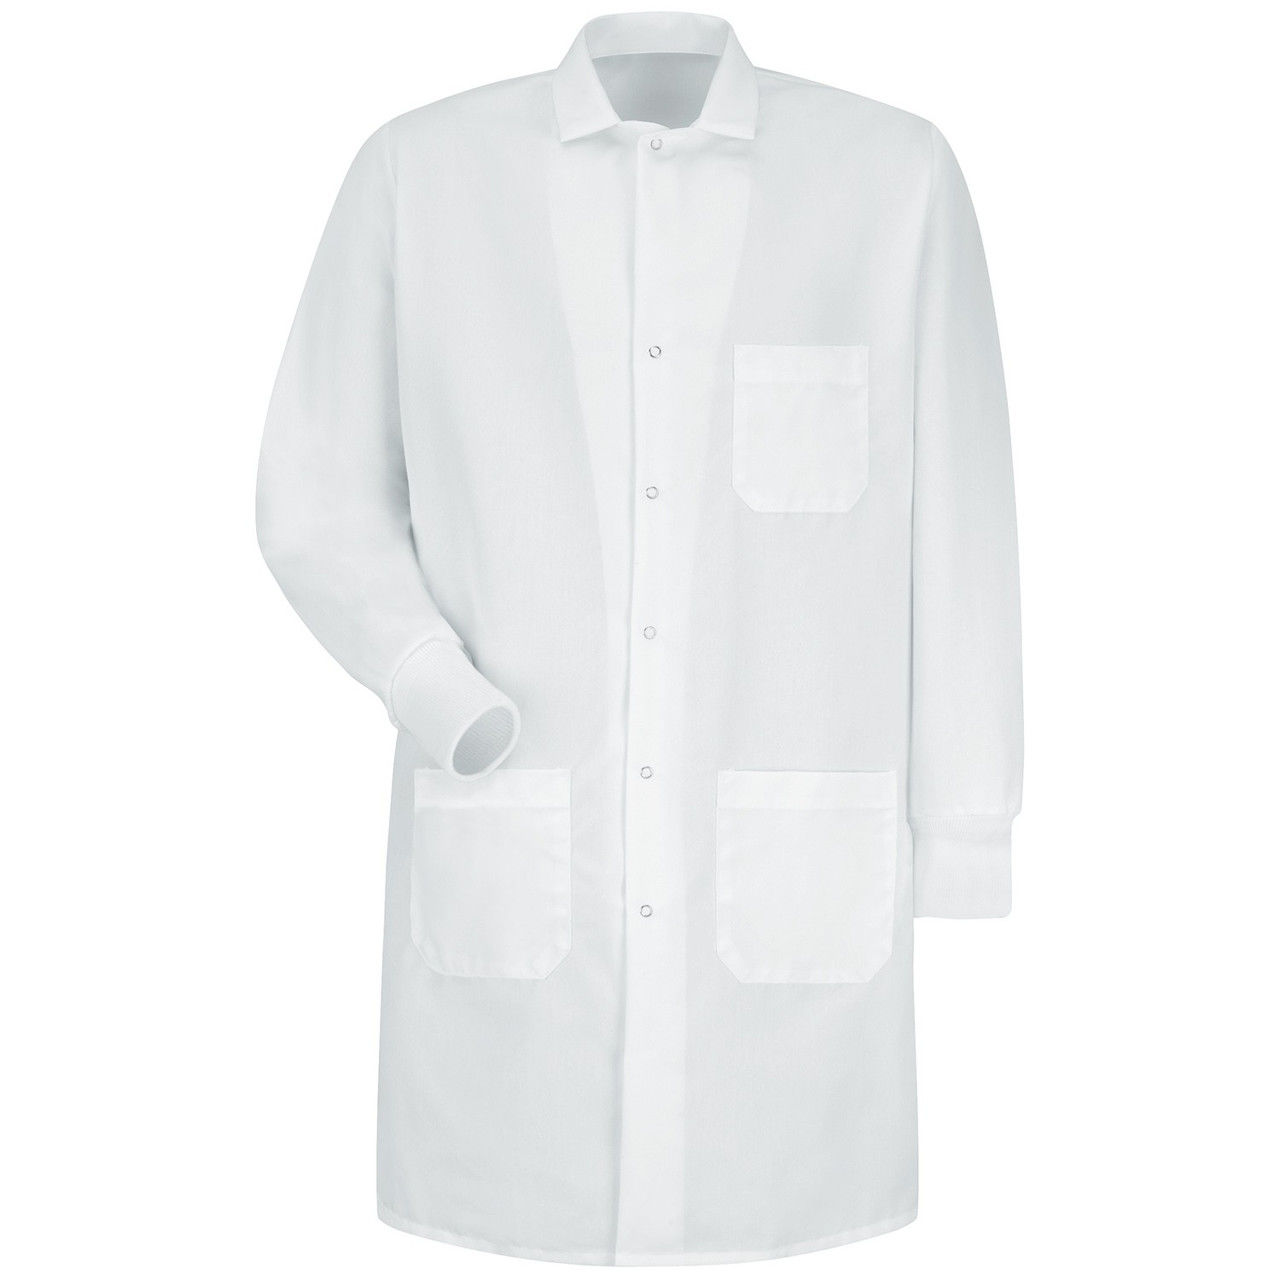 Is the cuffed lab coat made of a fabric blend?